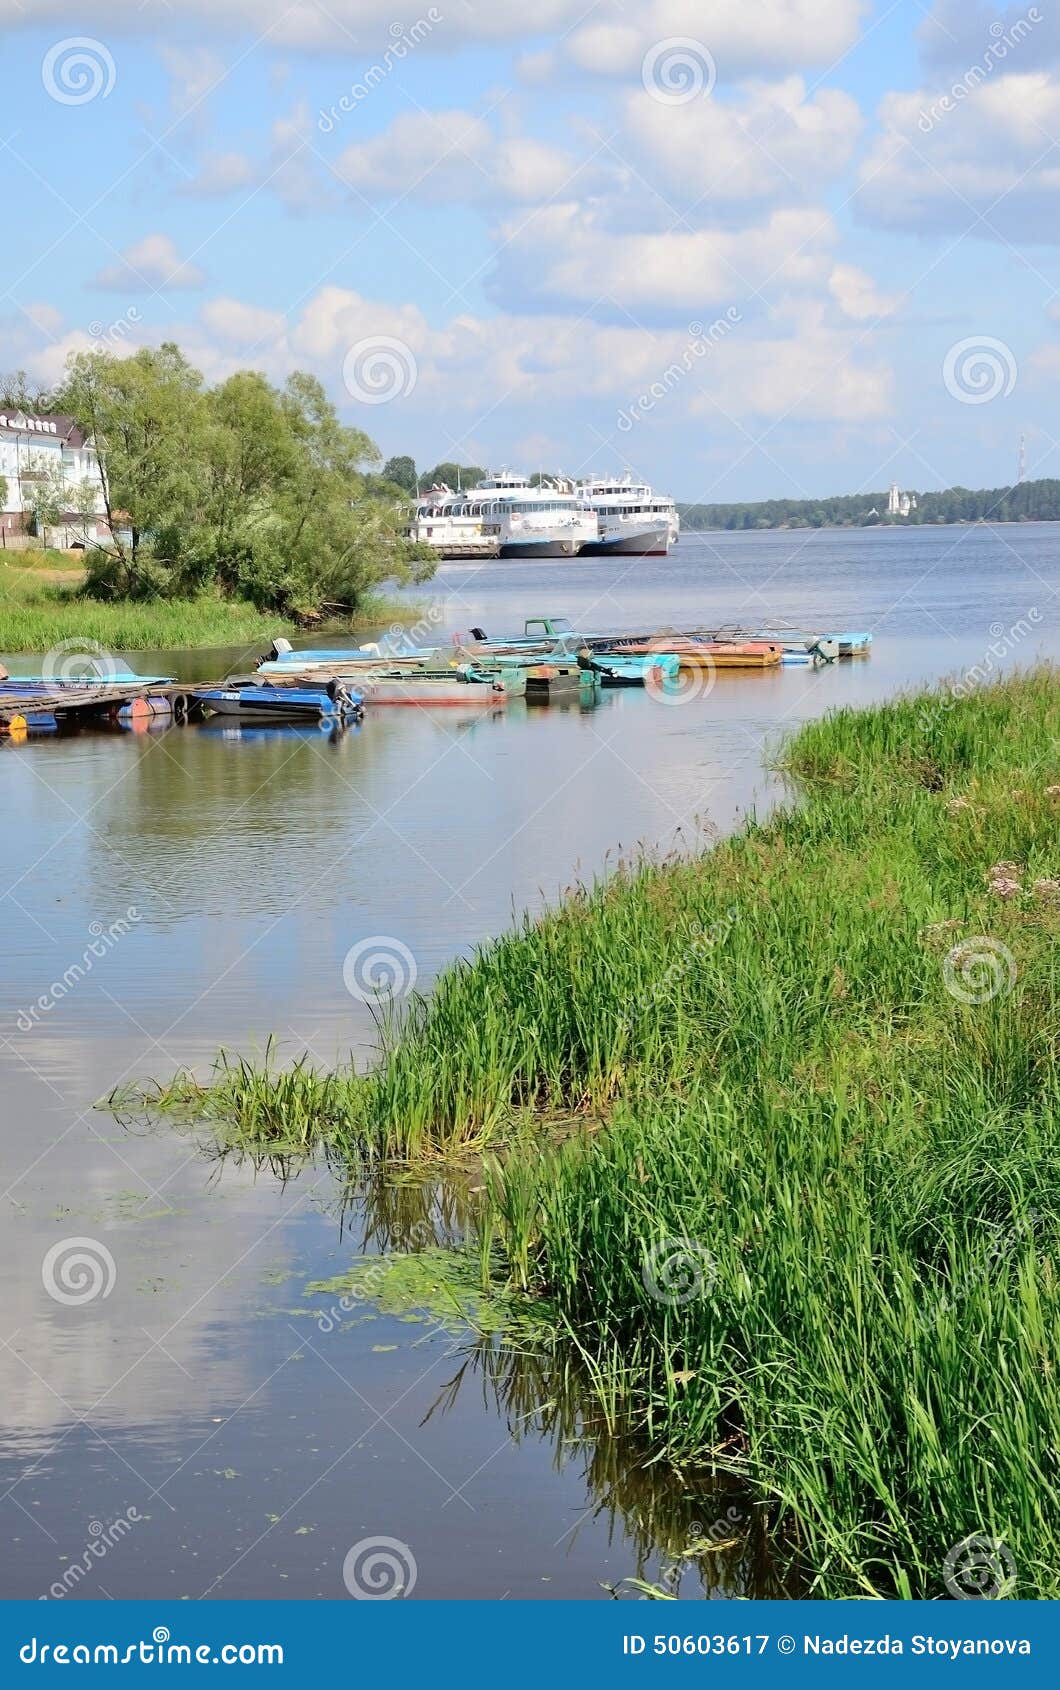 fishing boats and motor ships in volga river in summer, russia.